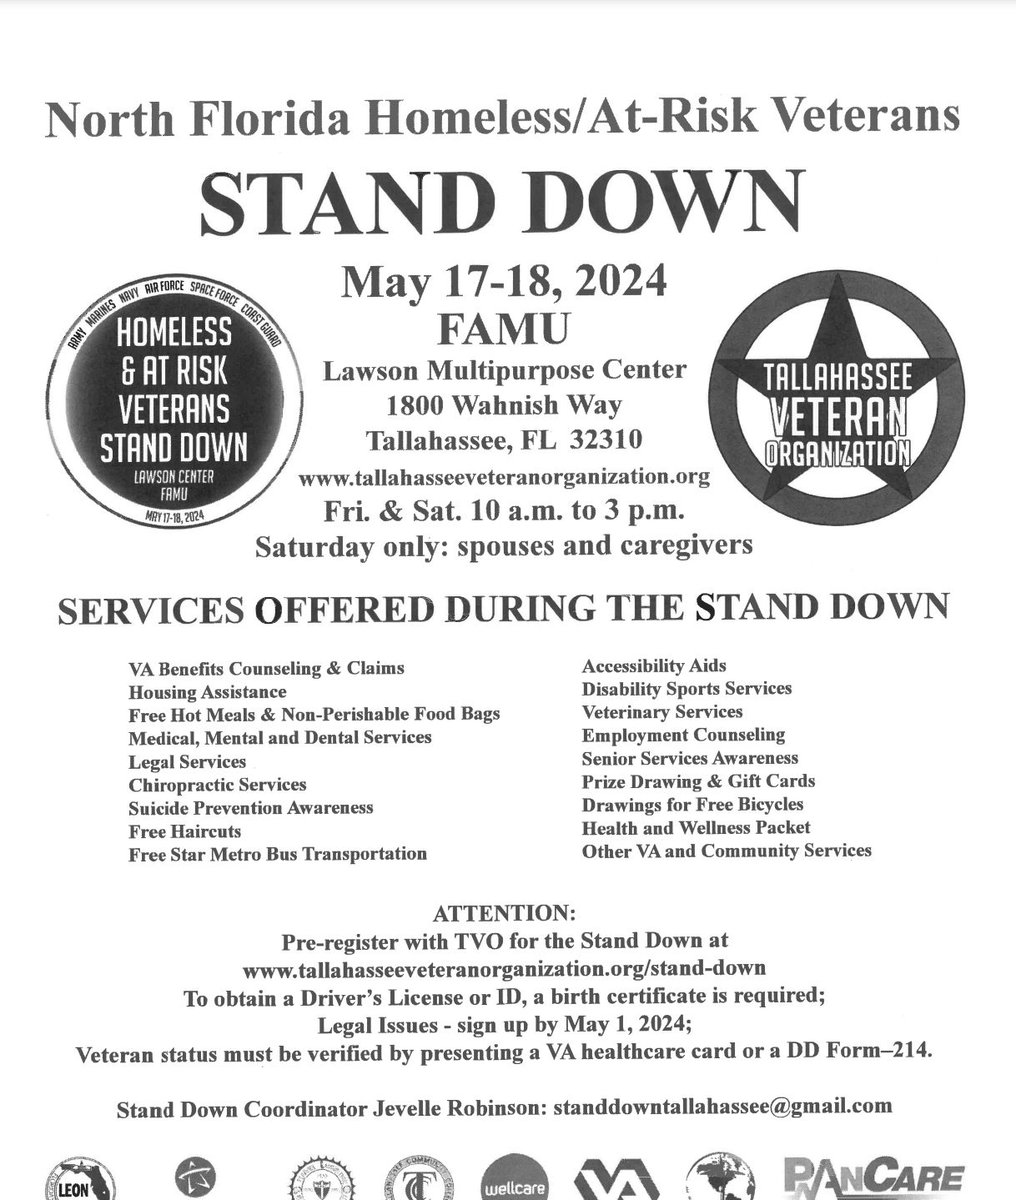 May 17-18, 2024 from 10am to 3pm please join us at the FAMU Lawson Multipurpose Center at 1800 Wahnish Way, Tallahassee, FL 32310 for the North Florida Homeless + At-Risk Veterans Stand Down. See below for more details.